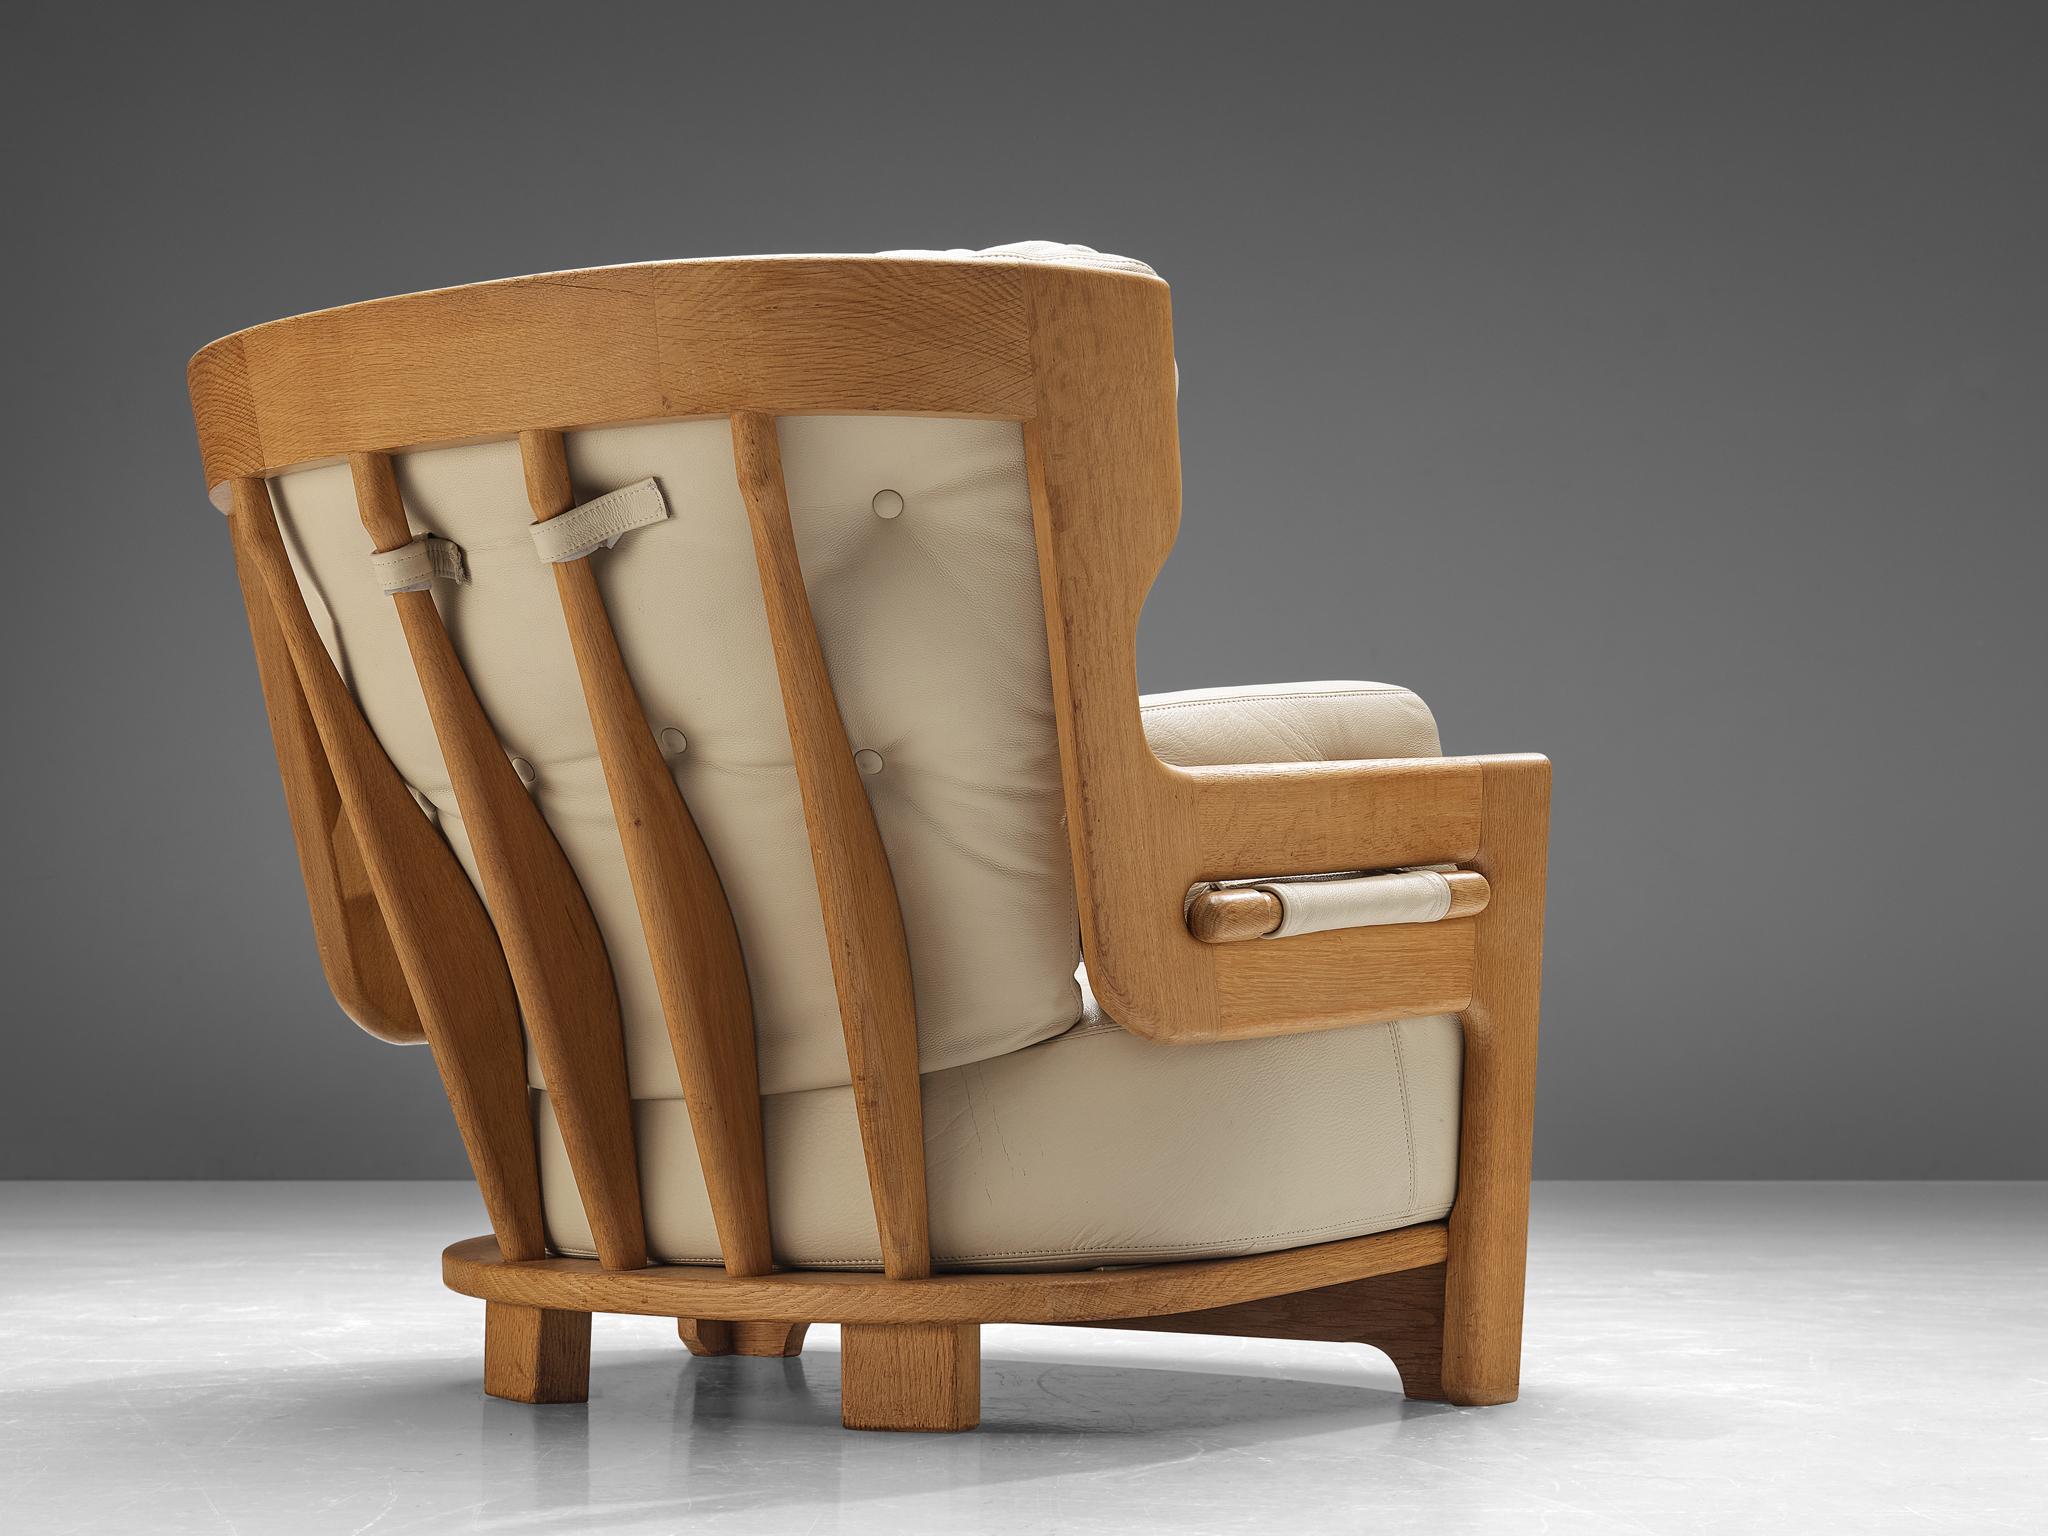 Guillerme et Chambron for Votre Maison, lounge chair 'Denis', leather, oak, France, 1960s 

Extraordinary Guillerme and Chambron lounge chair in solid oak with the typical characteristic decorative details at the back and capricious forms of the